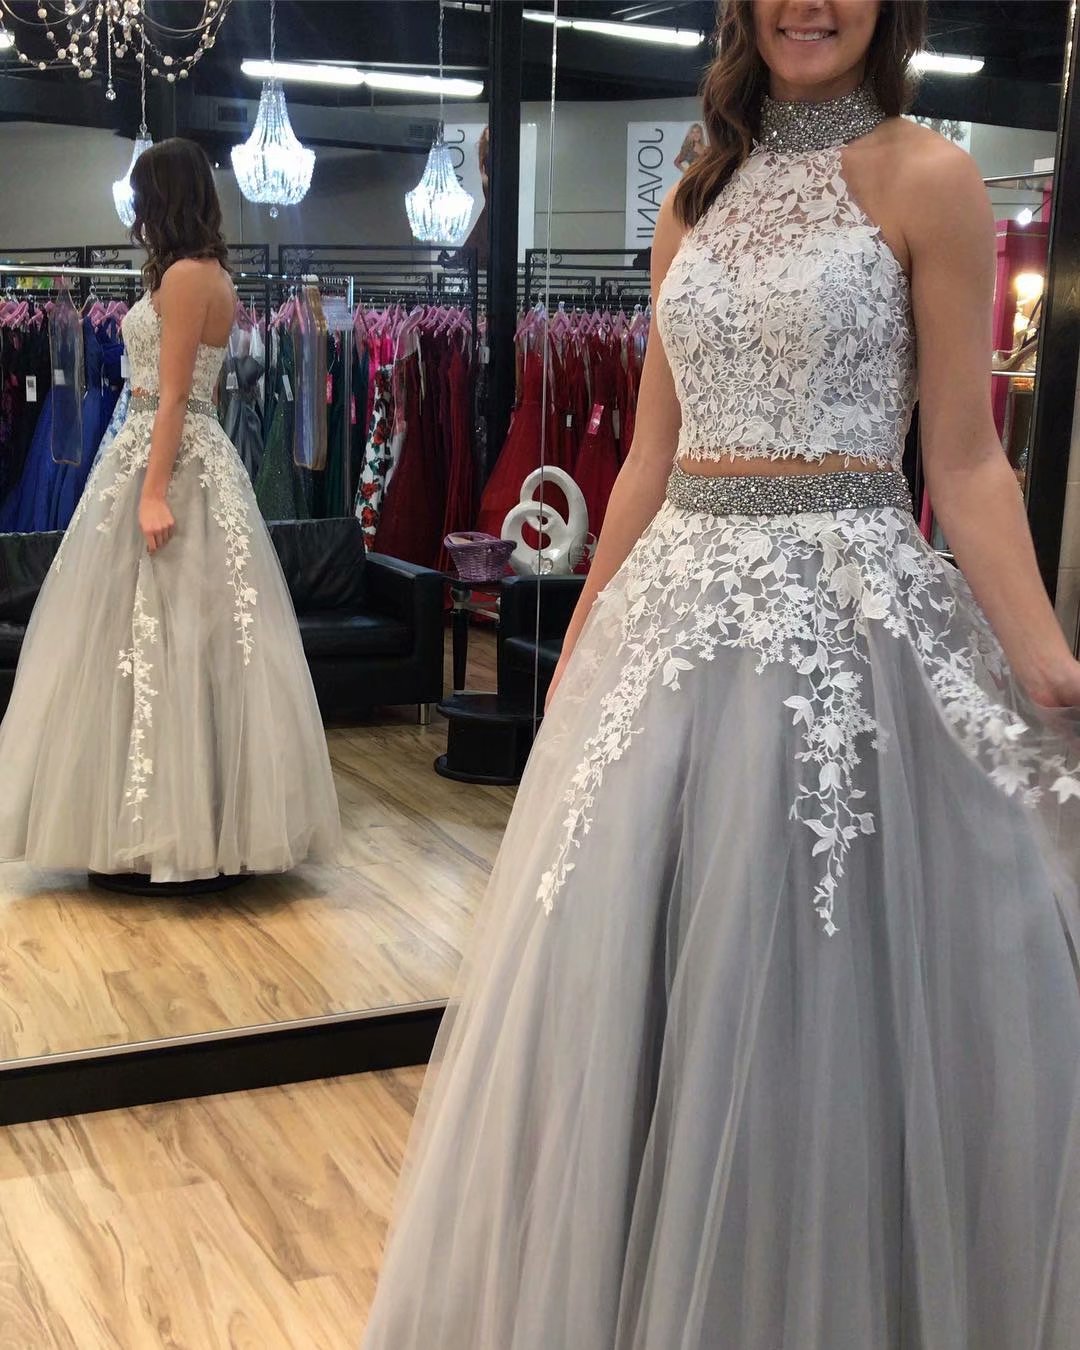 Grey Prom Gowns Two Piece A-line Prom Dresses, Prom Dress,prom Dresses For Teens,tulle Applique Halter Evening Dresses